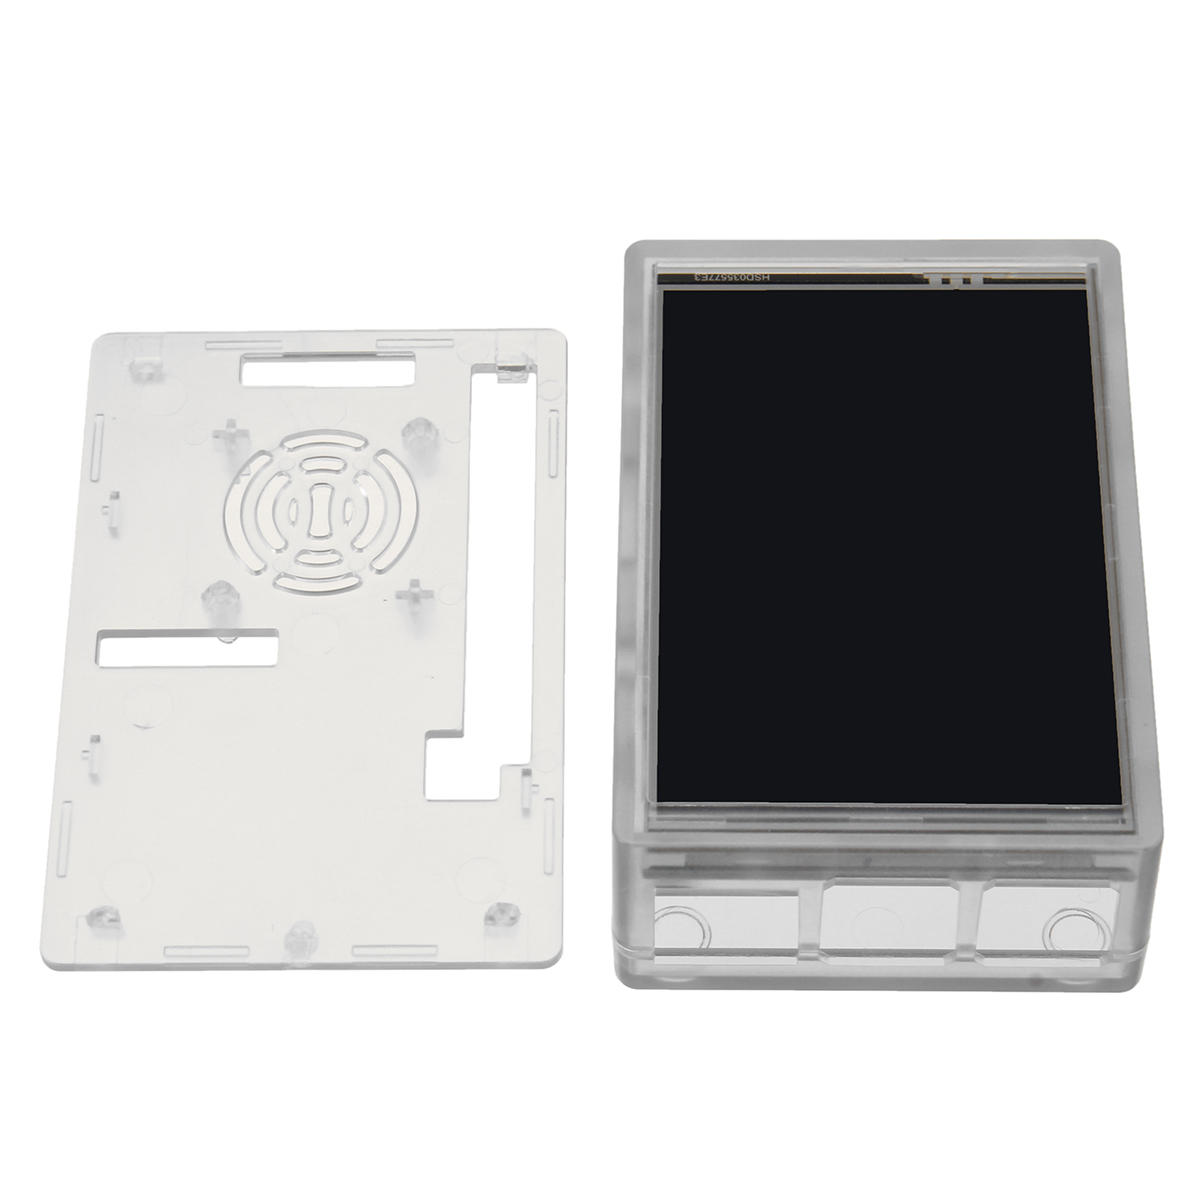 

Clear Acrylic Case Enclosure Protective Shell+ 3.5 Inch TFT Touch Screen LCD Display Monitor kit for Raspberry Pi